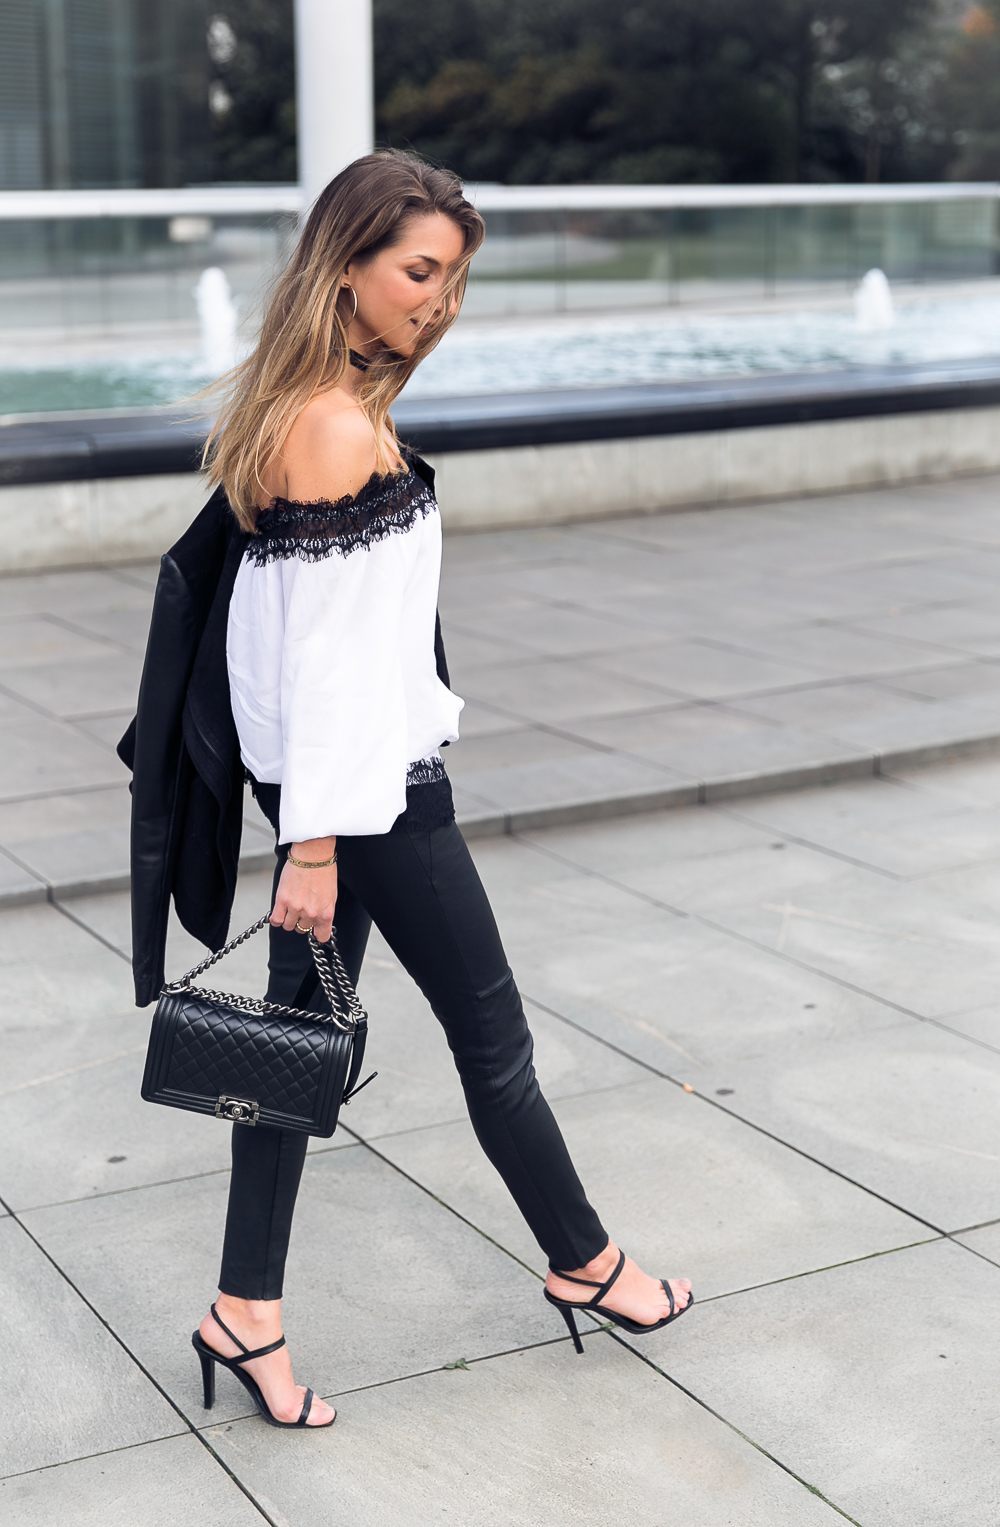 evening outfit off shoulder top white lace leather pants heels inspiration fashion blog essen ruhrgebiet